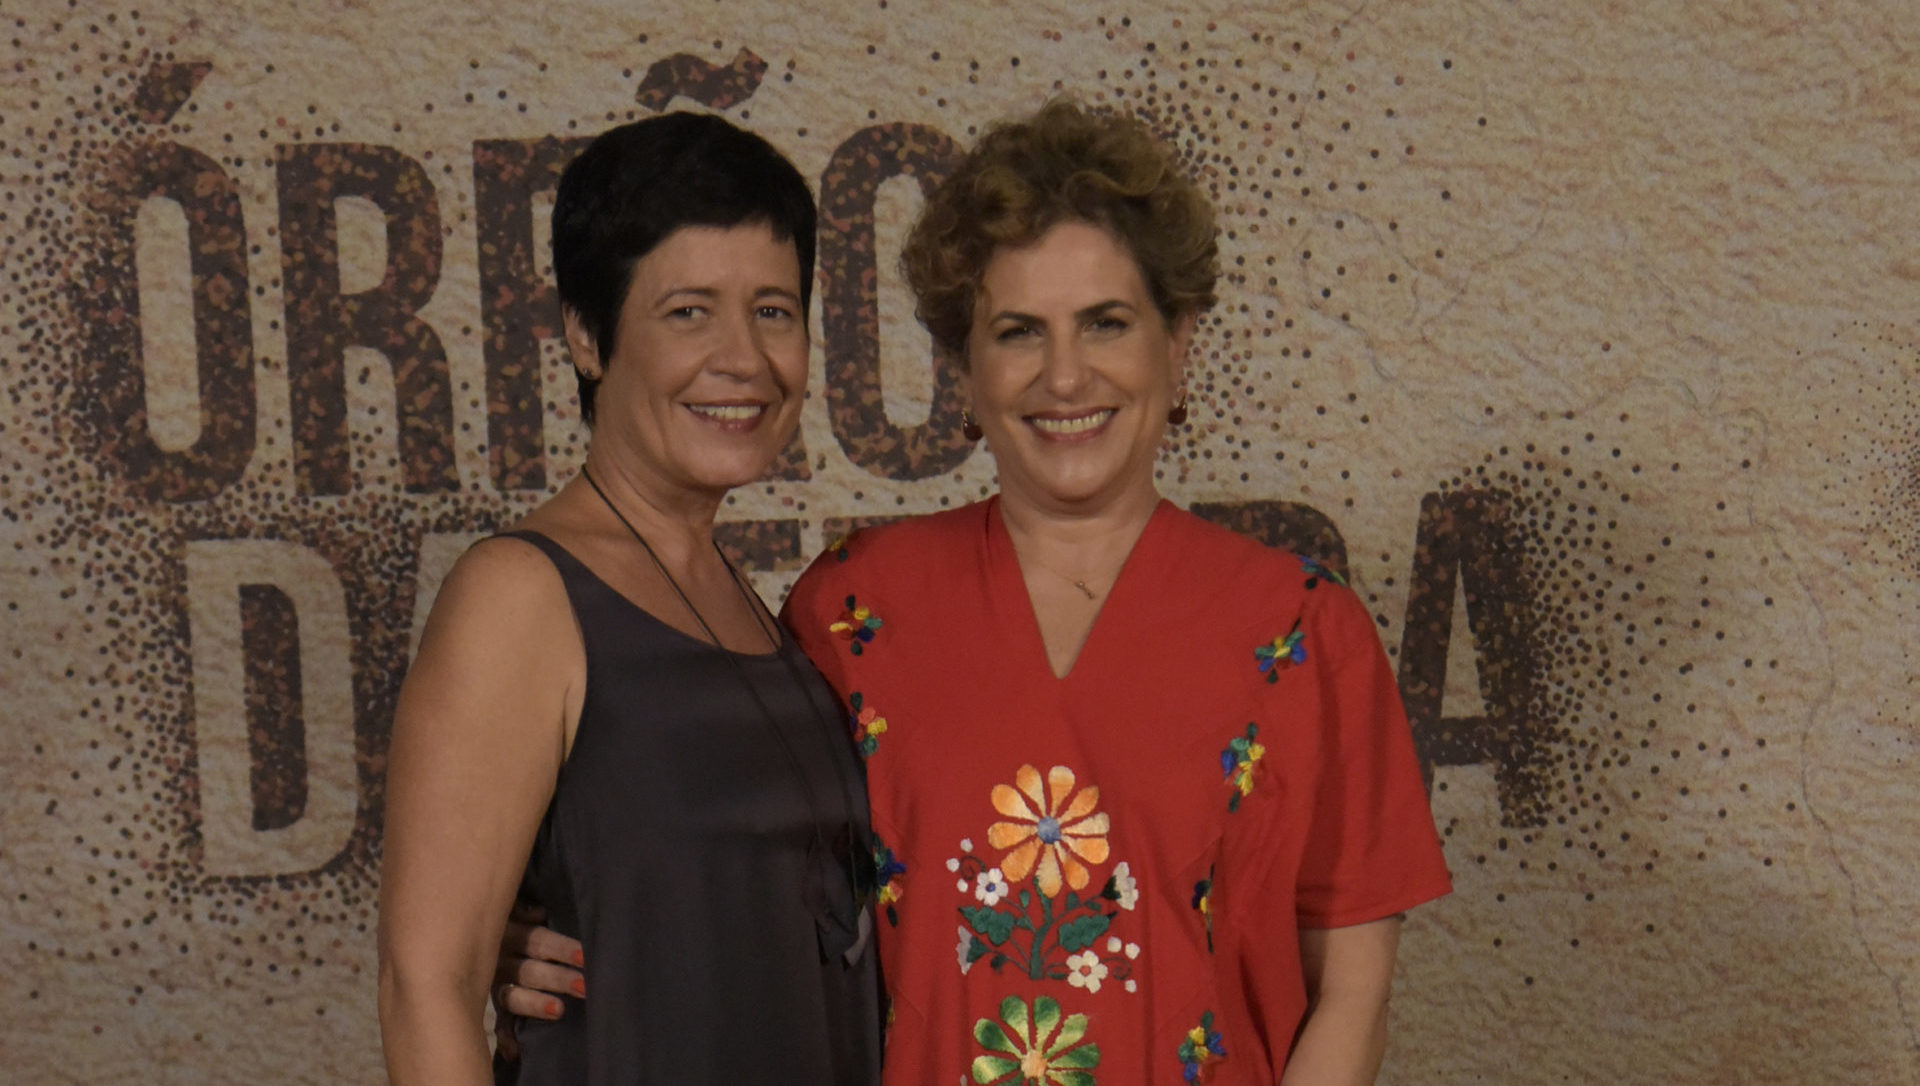 Thelma Guedes e Duca Rachid